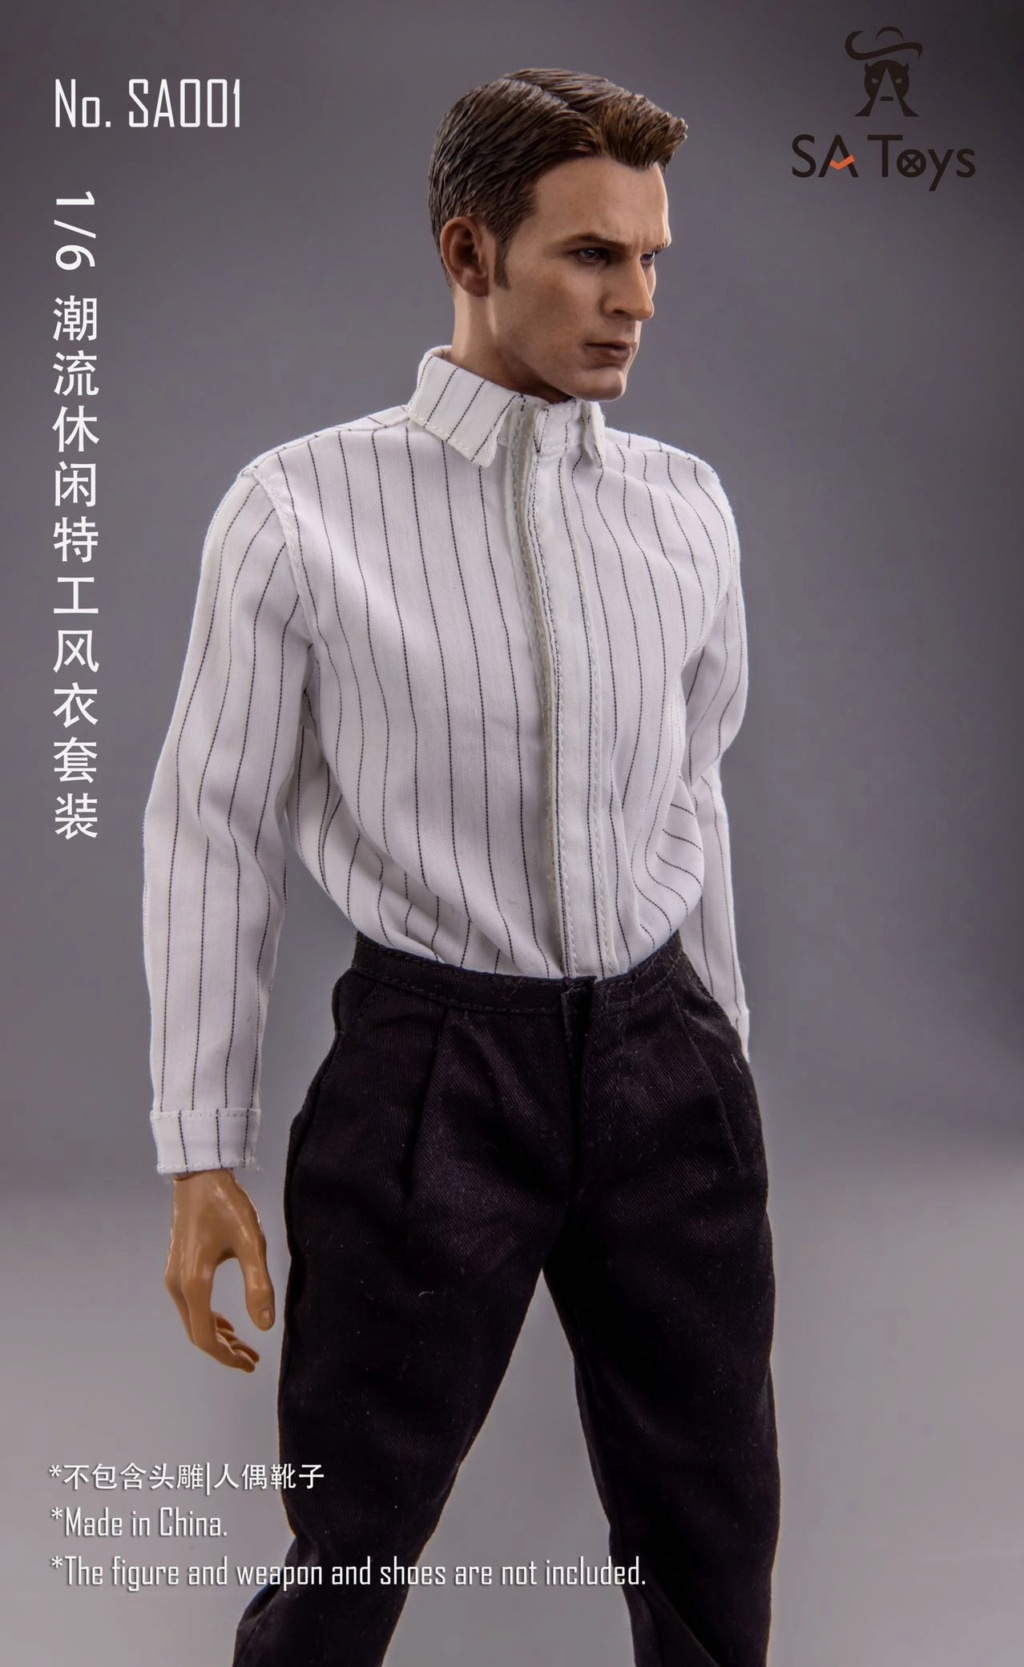 Clothing - NEW PRODUCT: SA Toys: 1/6 Trend Casual Agent Trench coat set (SA001) 15325611